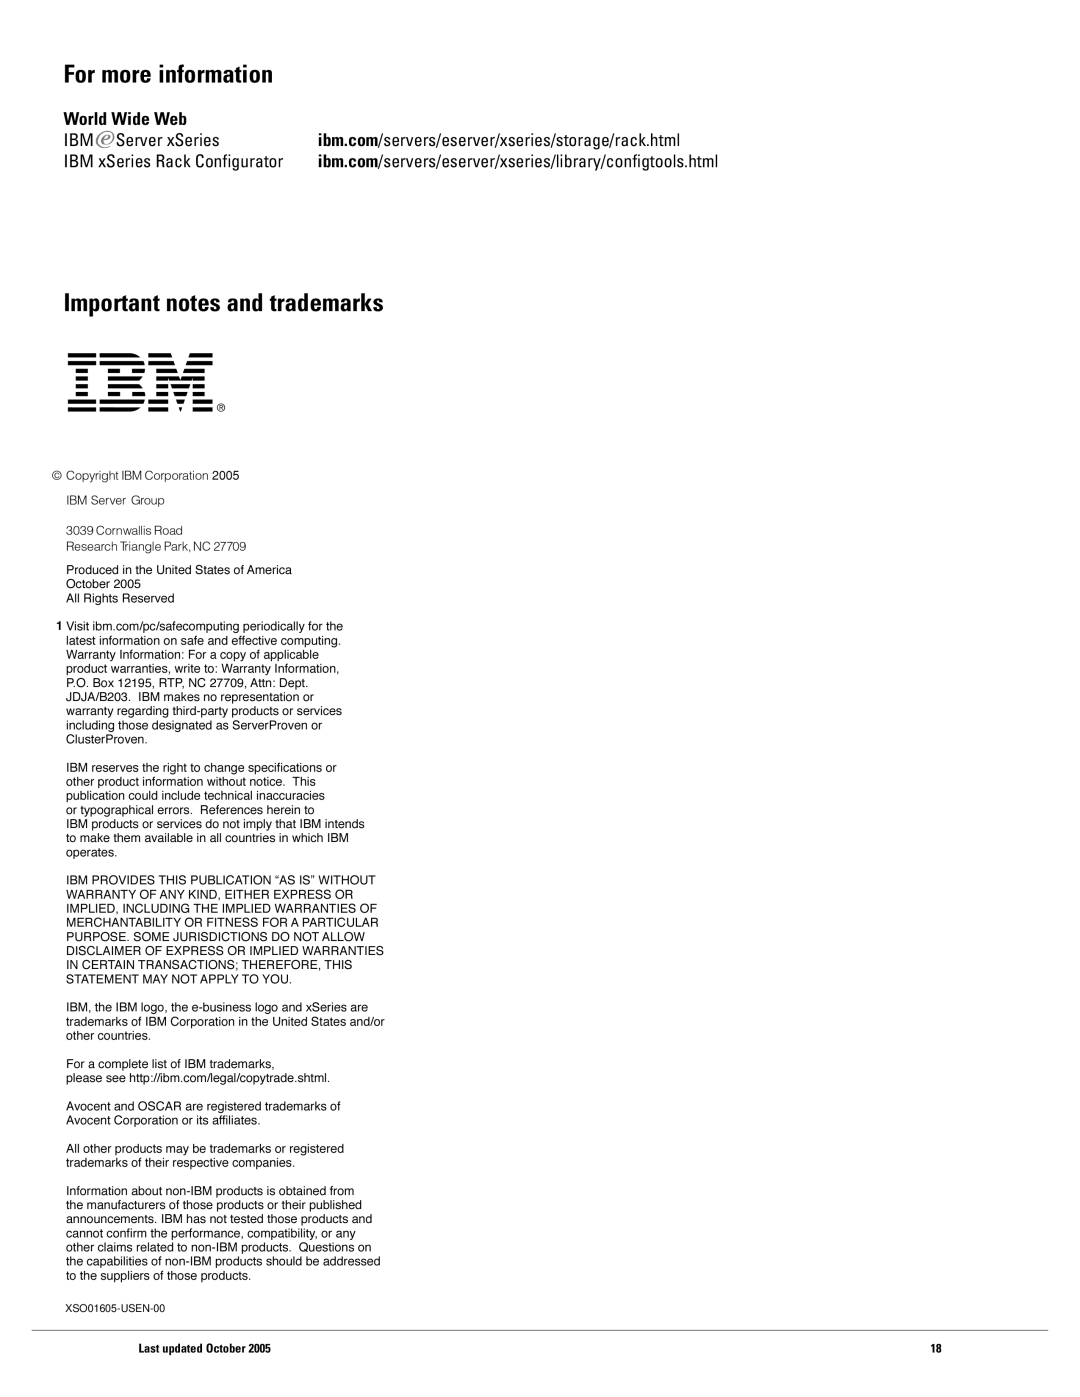 IBM 2X16, 1X8 For more information, Important notes and trademarks, World Wide Web, Last updated October, XSO01605-USEN-00 